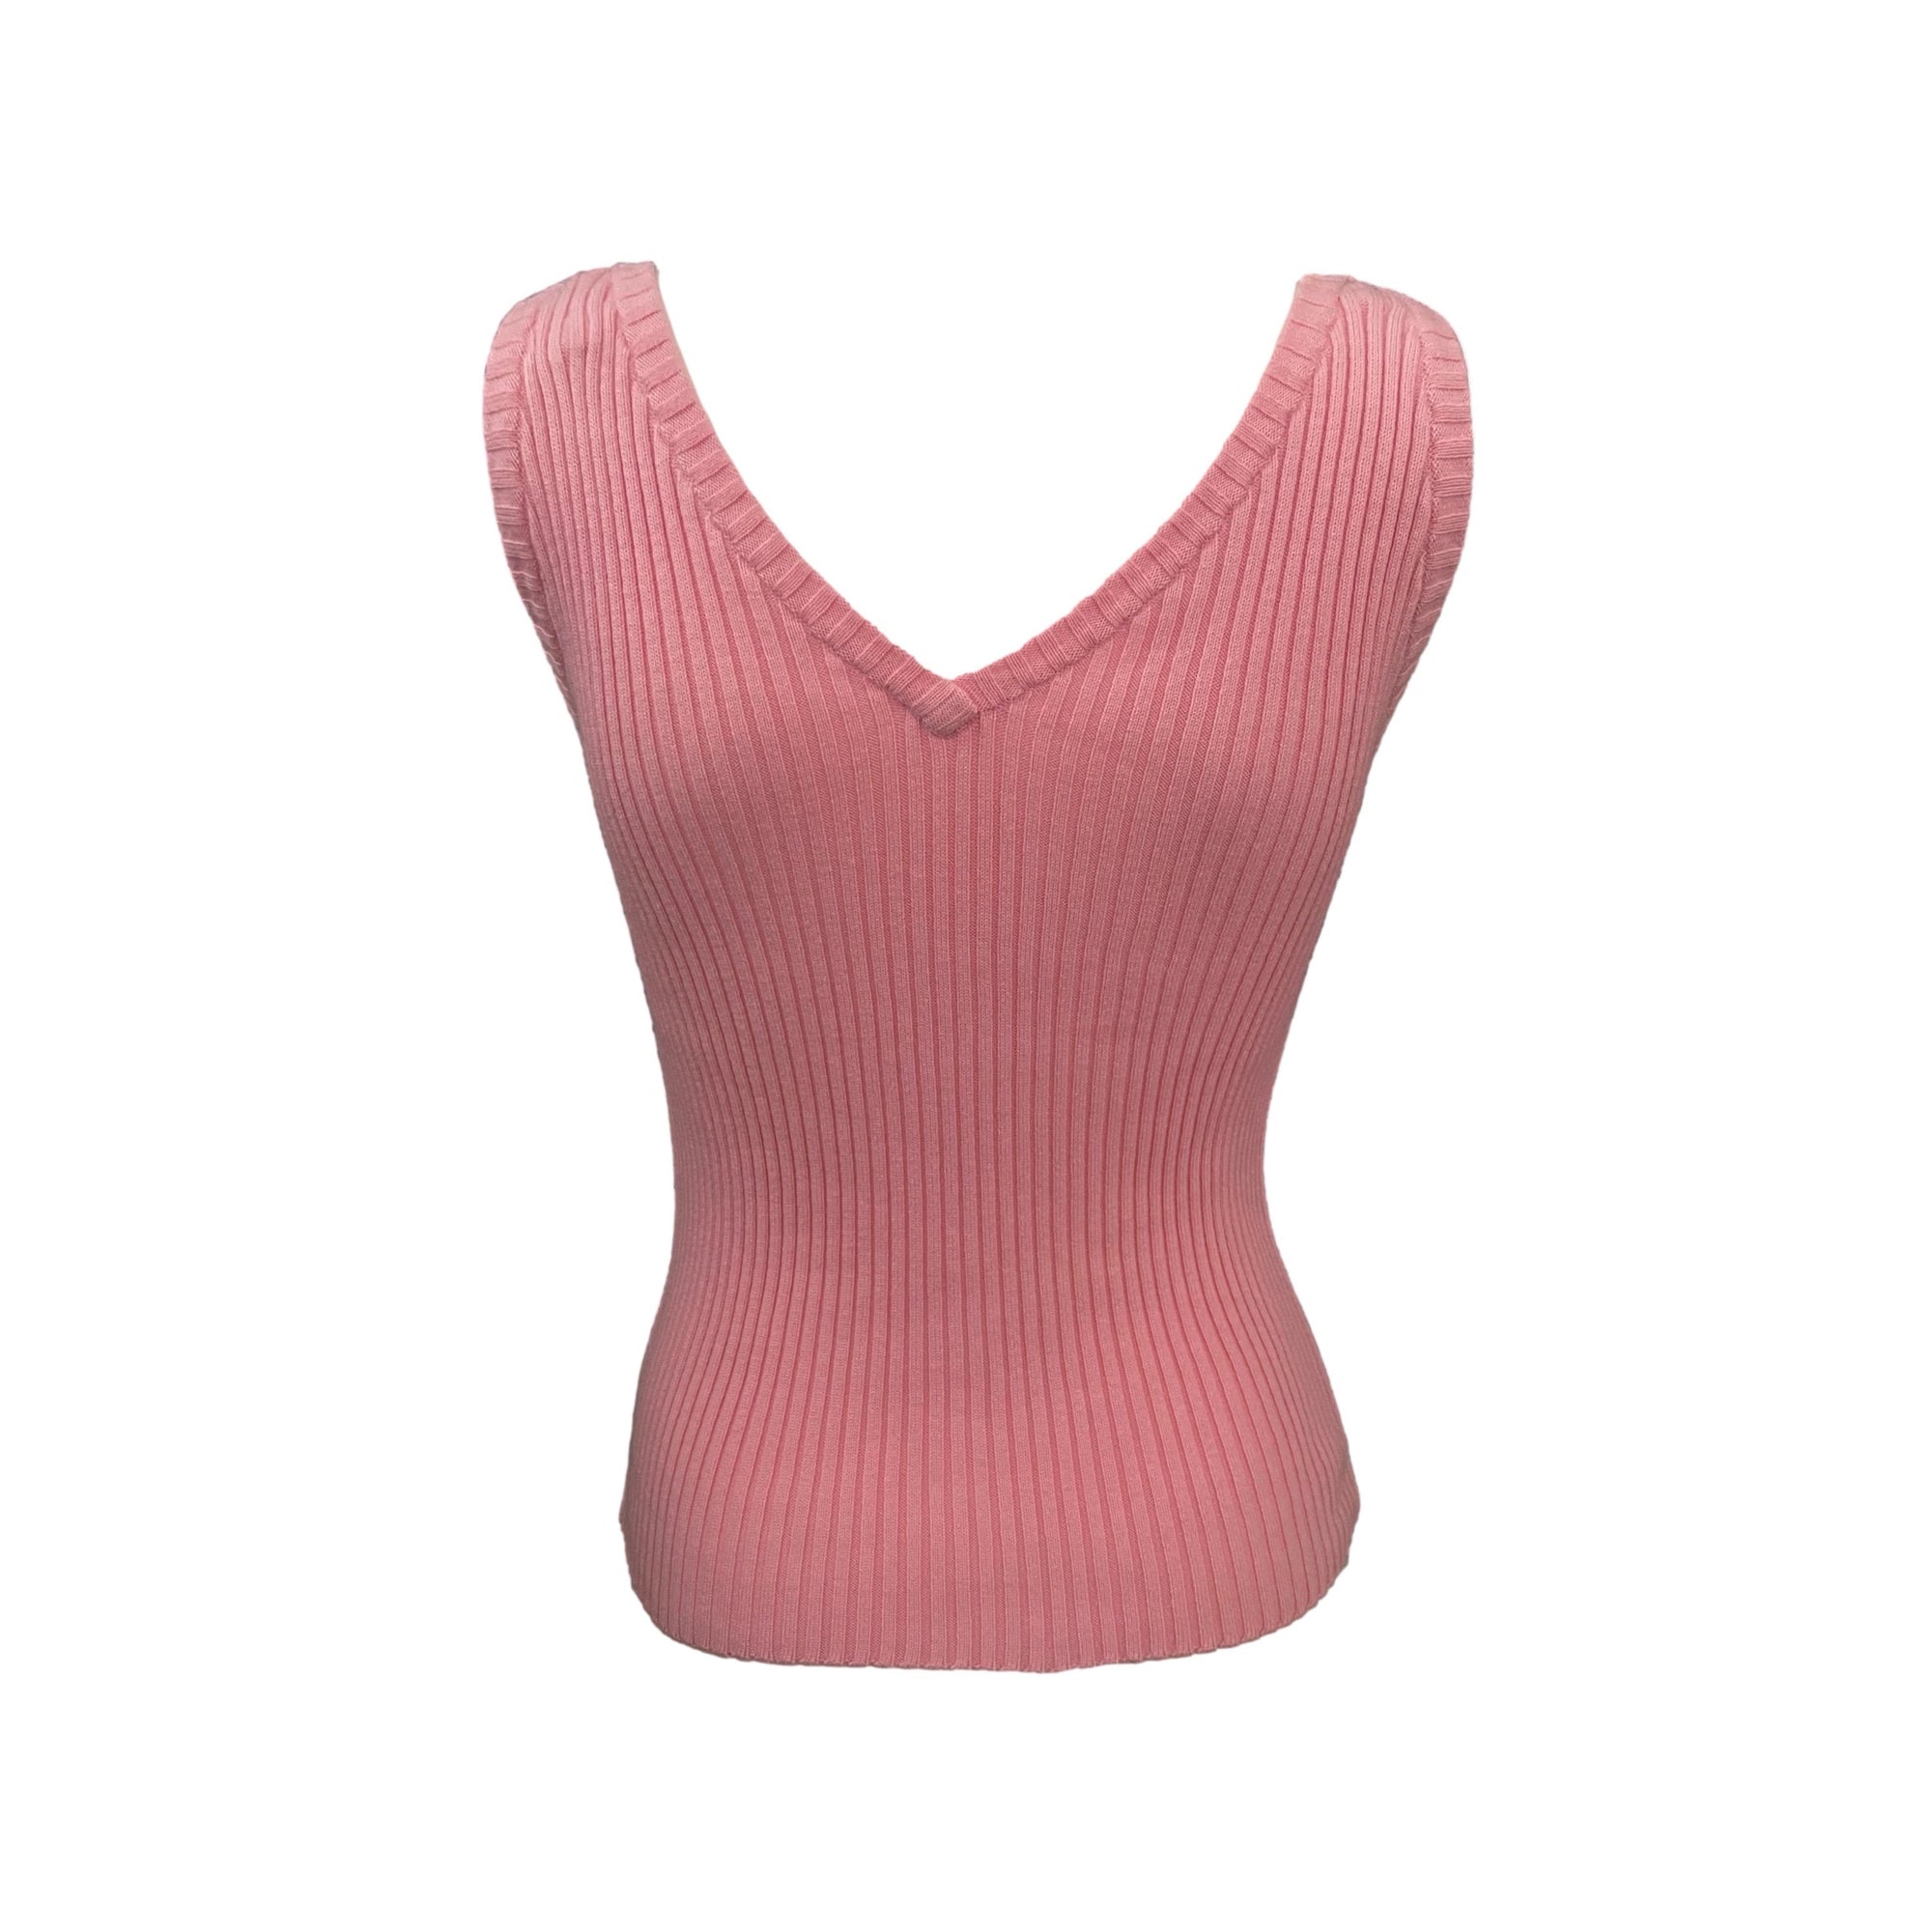 Chanel Pink Ribbed Tank Top - Apparel